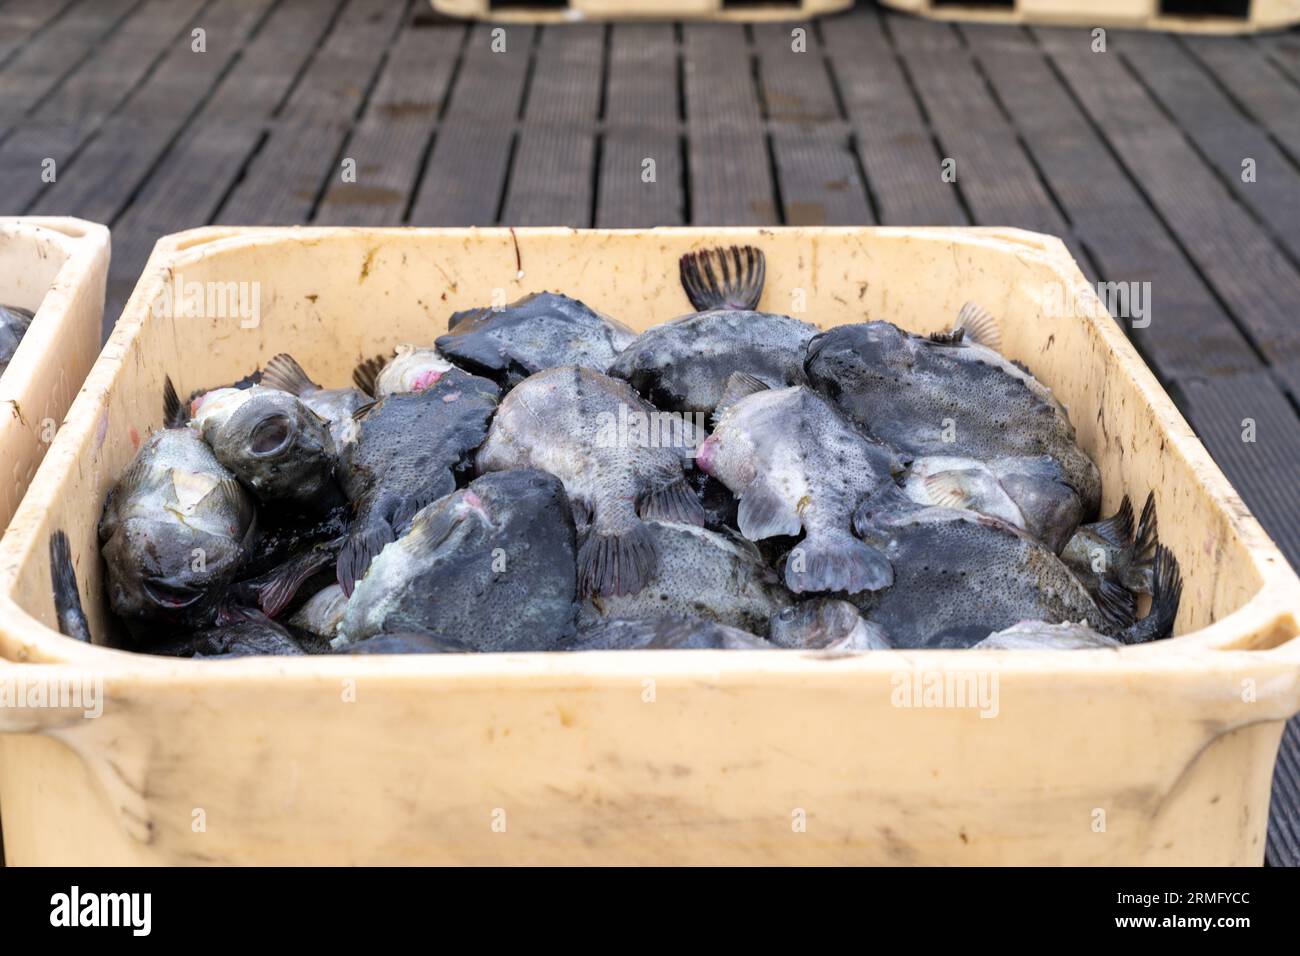 Atlantic halibut fish freshly caught on the docks from a fishing boat, stored in containers full of ice in Iceland Stock Photo